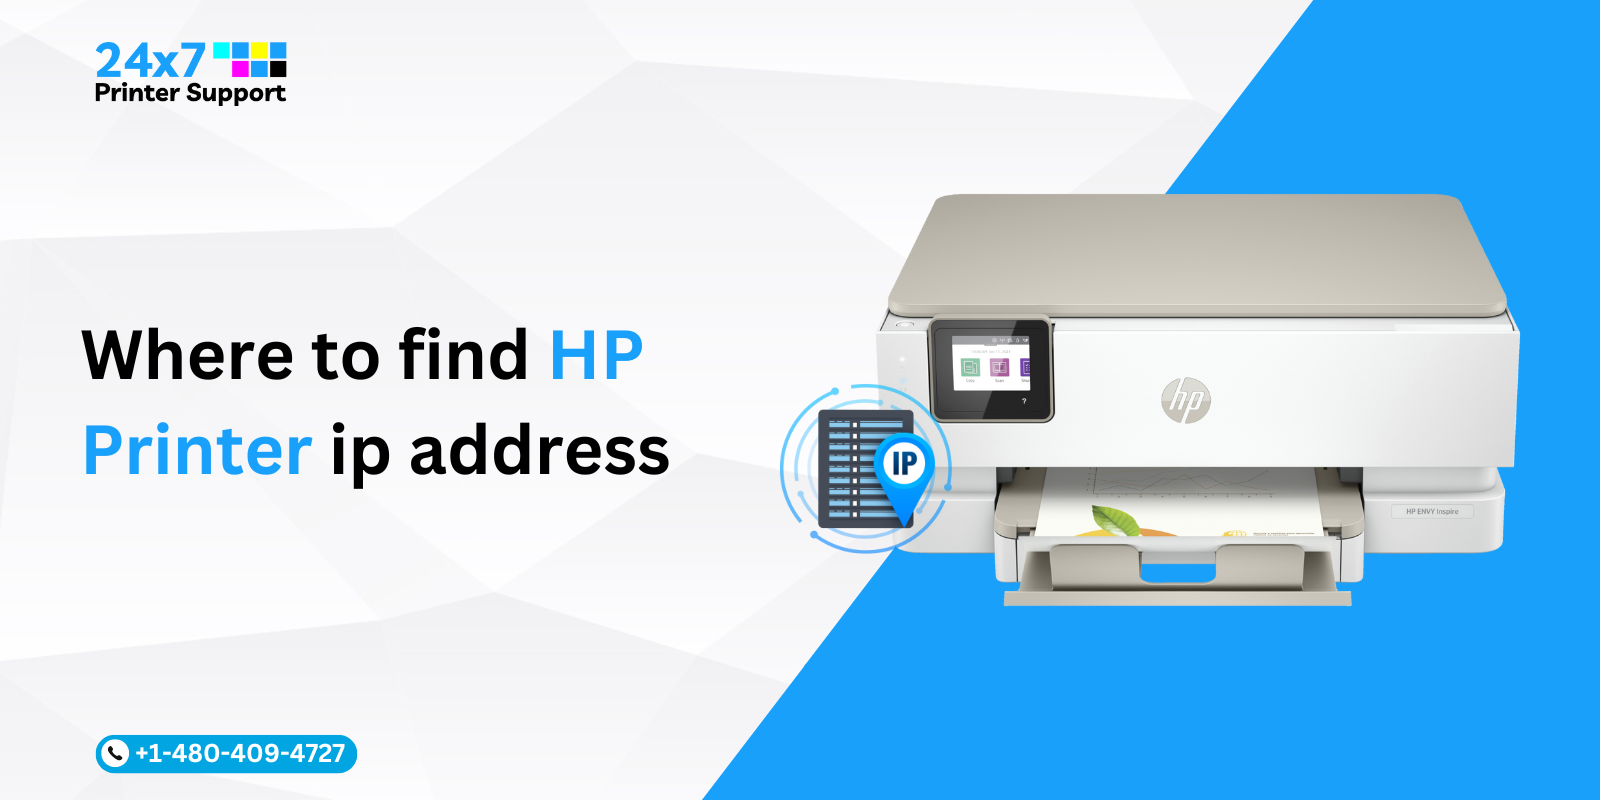 Where to Find the HP Printer IP Address